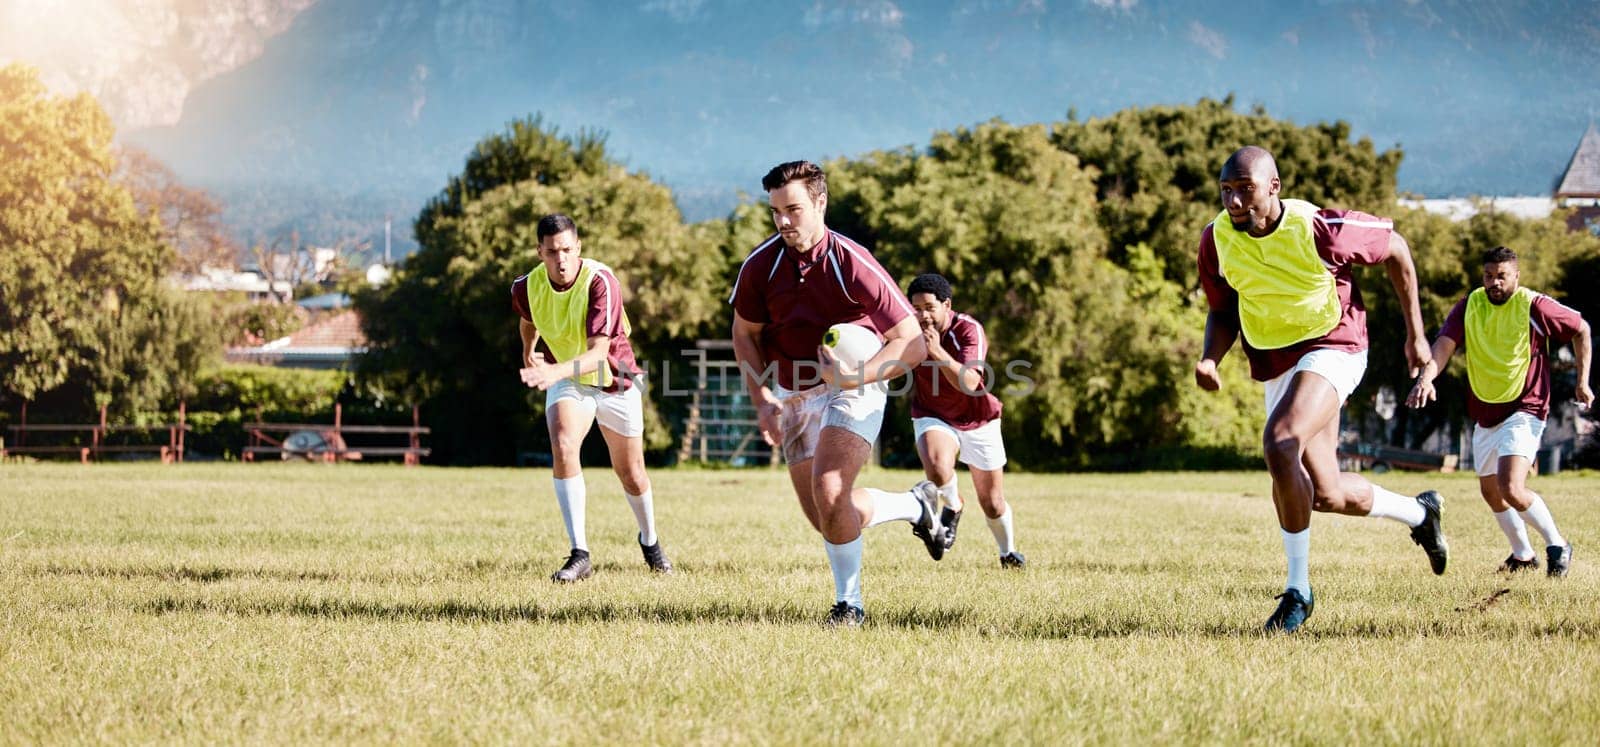 Game, sports and men playing rugby in a competition, match and running with a ball on a field. Fitness, exercise and players training for a team sport, cardio and collaboration in a park for practice by YuriArcurs